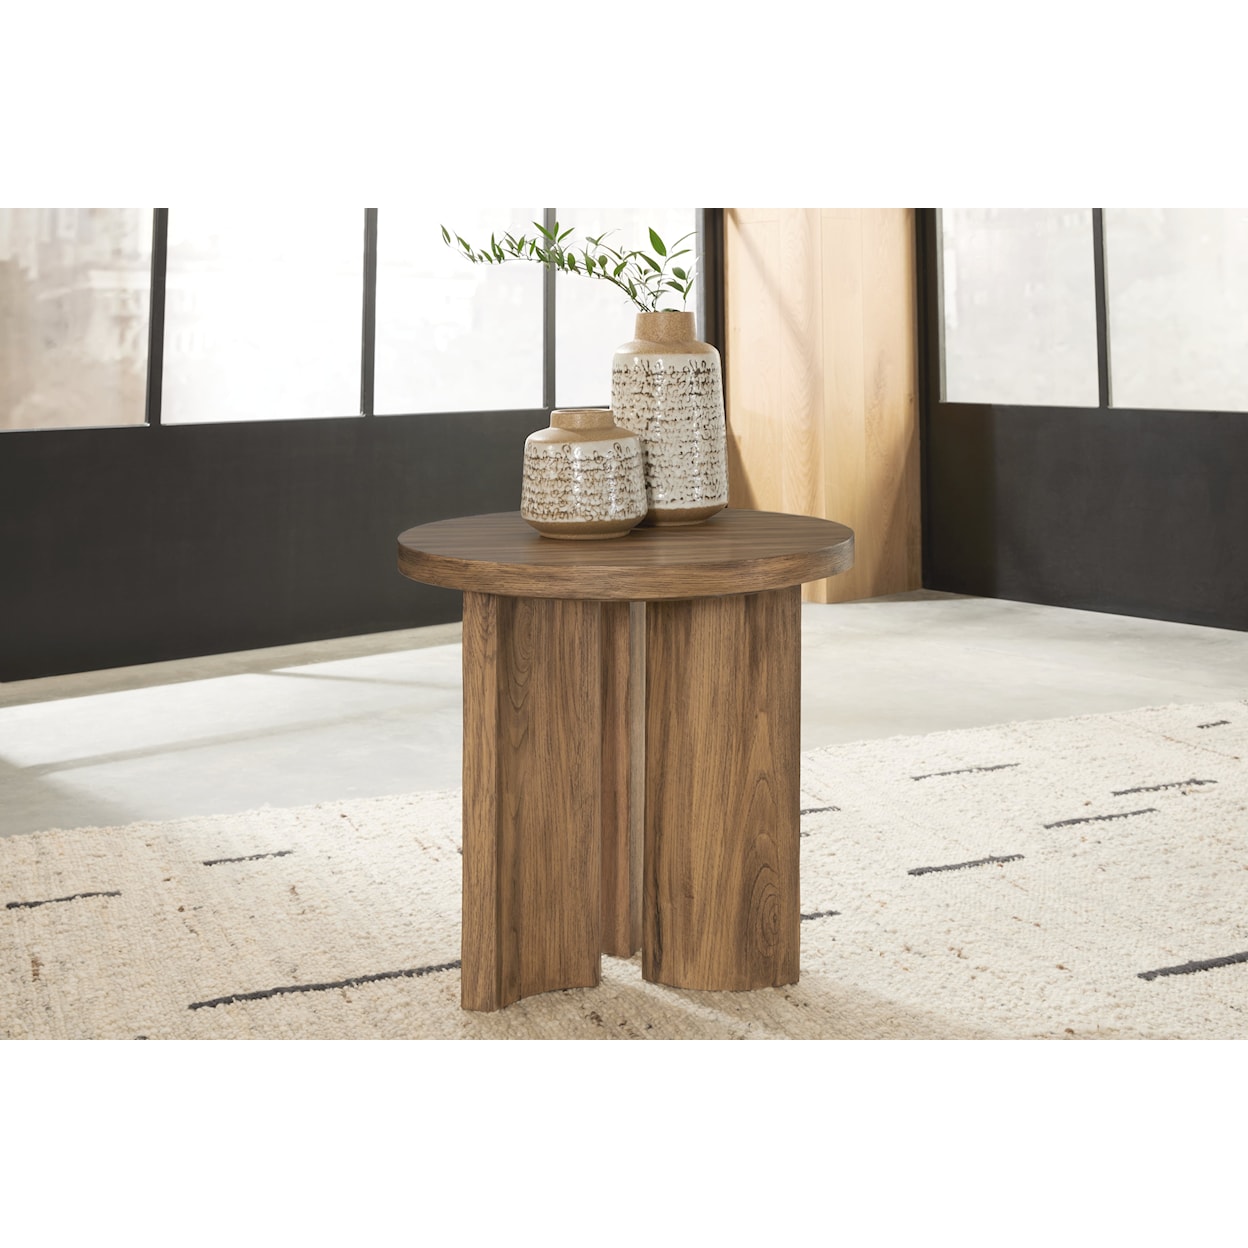 Signature Design Austanny Coffee Table and 2 End Tables